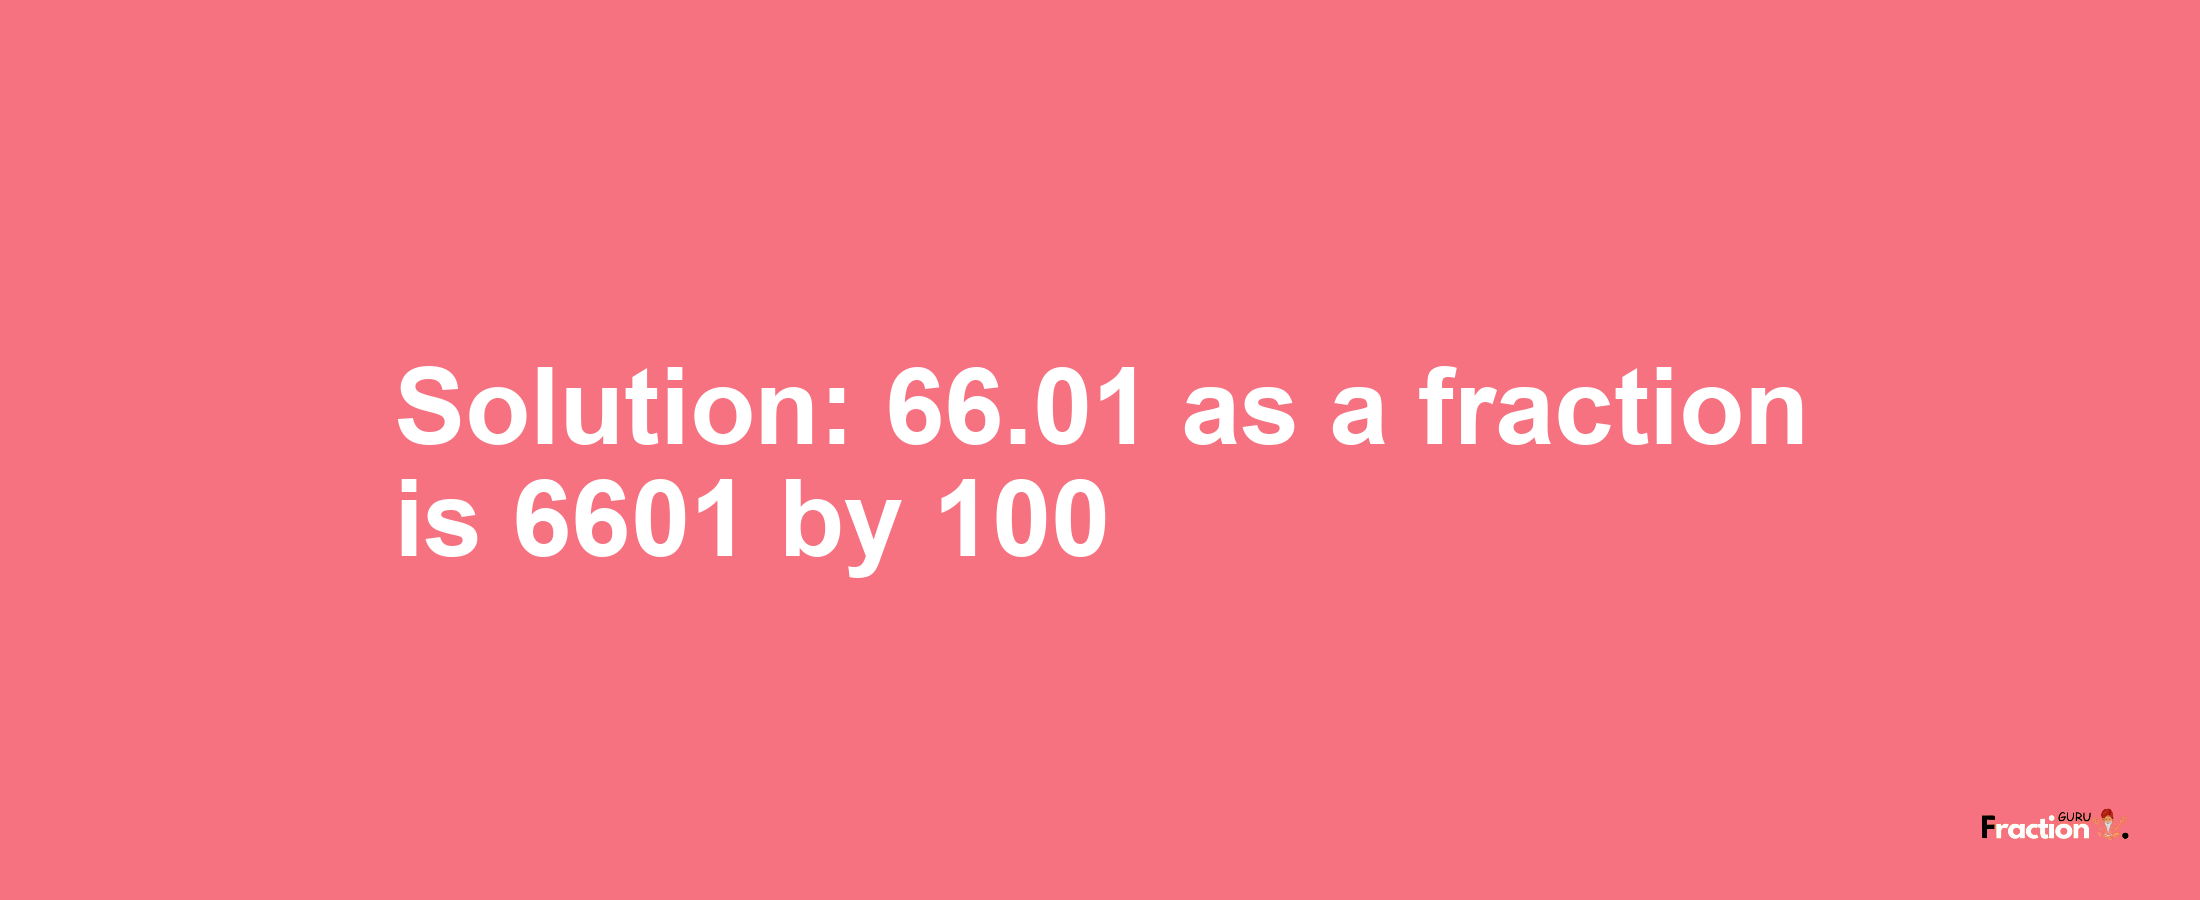 Solution:66.01 as a fraction is 6601/100